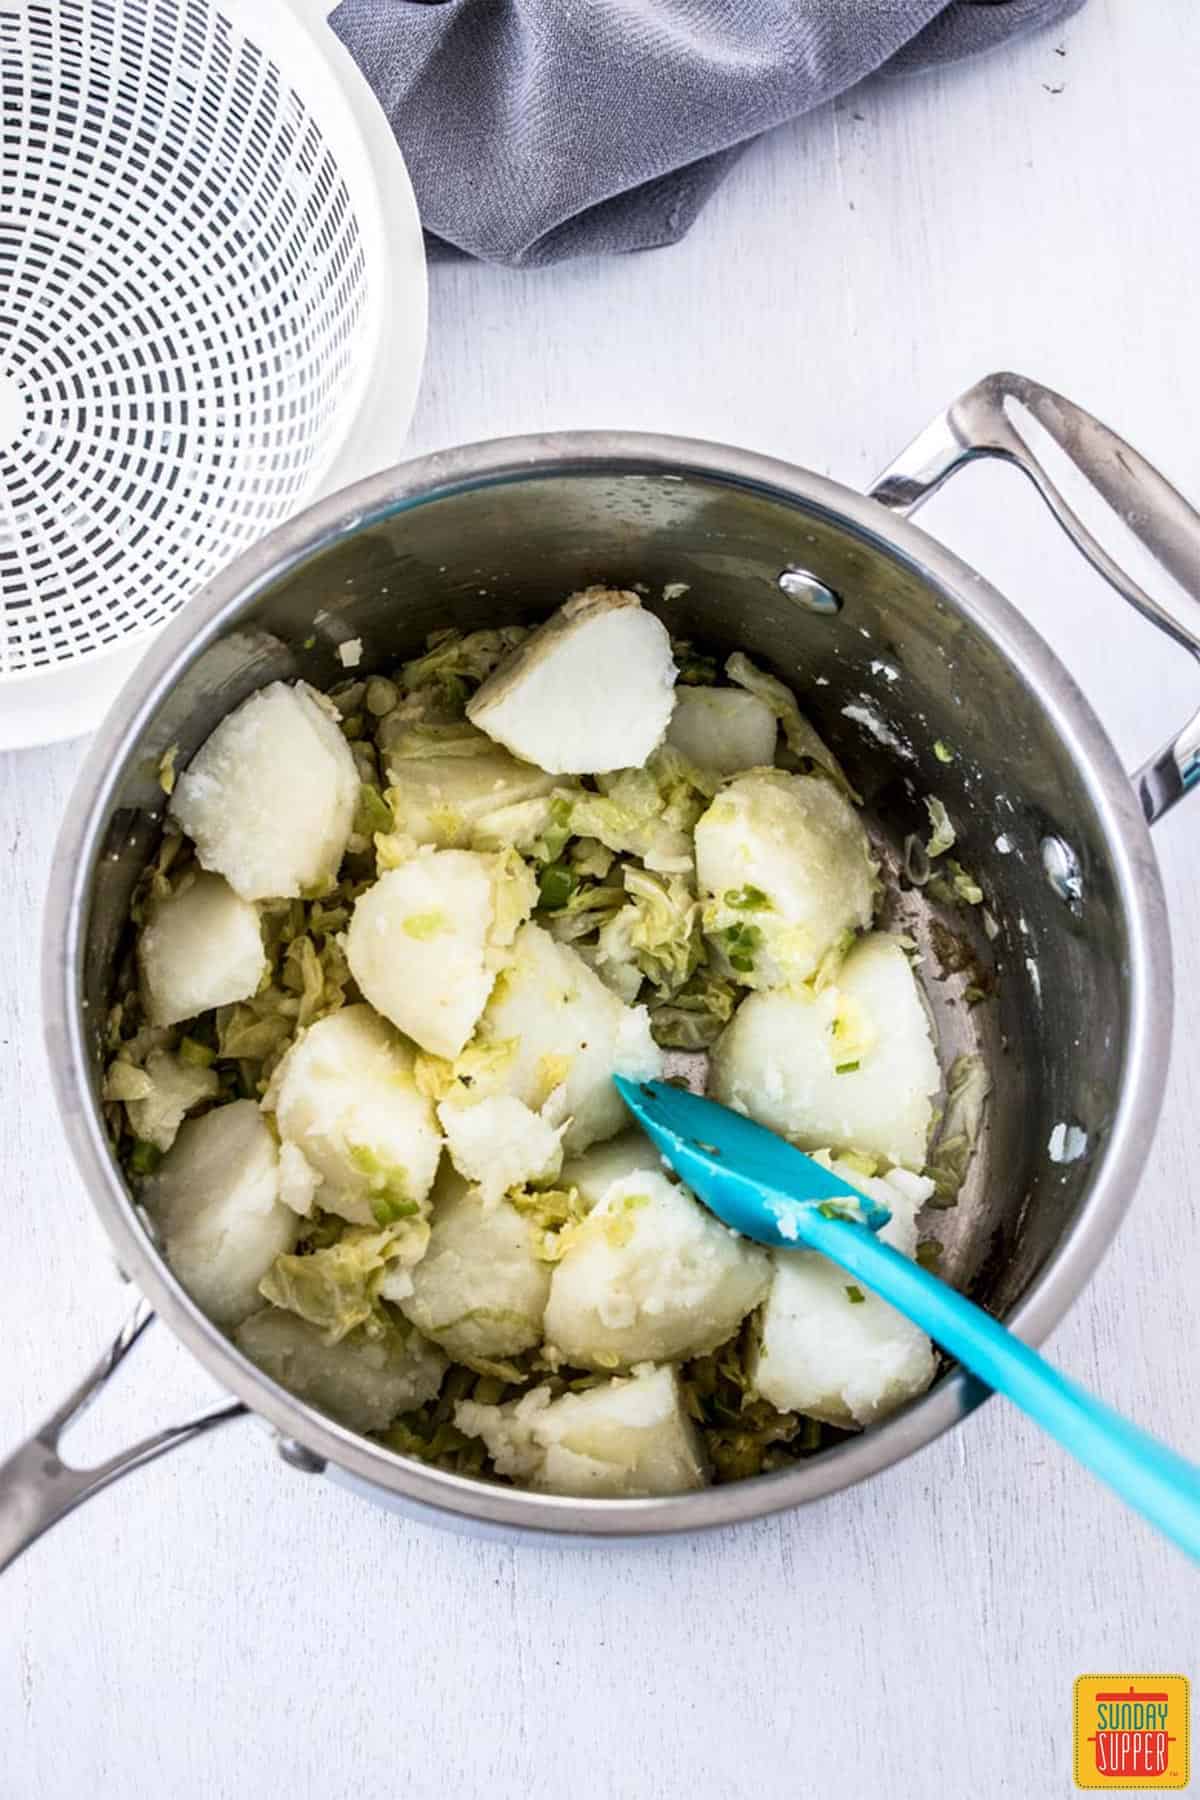 Potatoes added back to the pan 